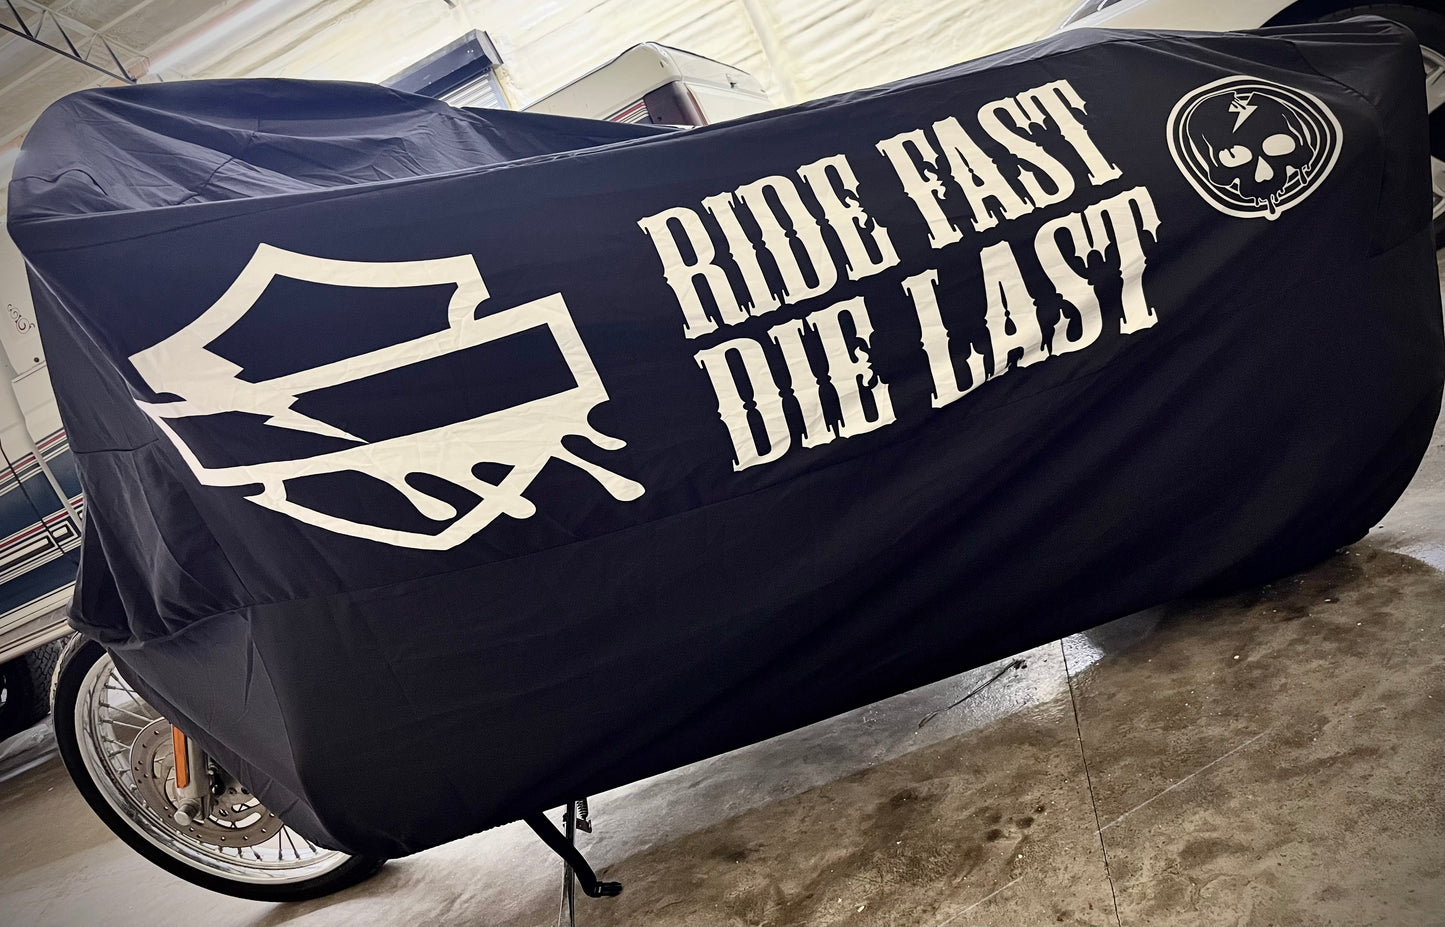 RFDL EDITION Motorcycle Cover